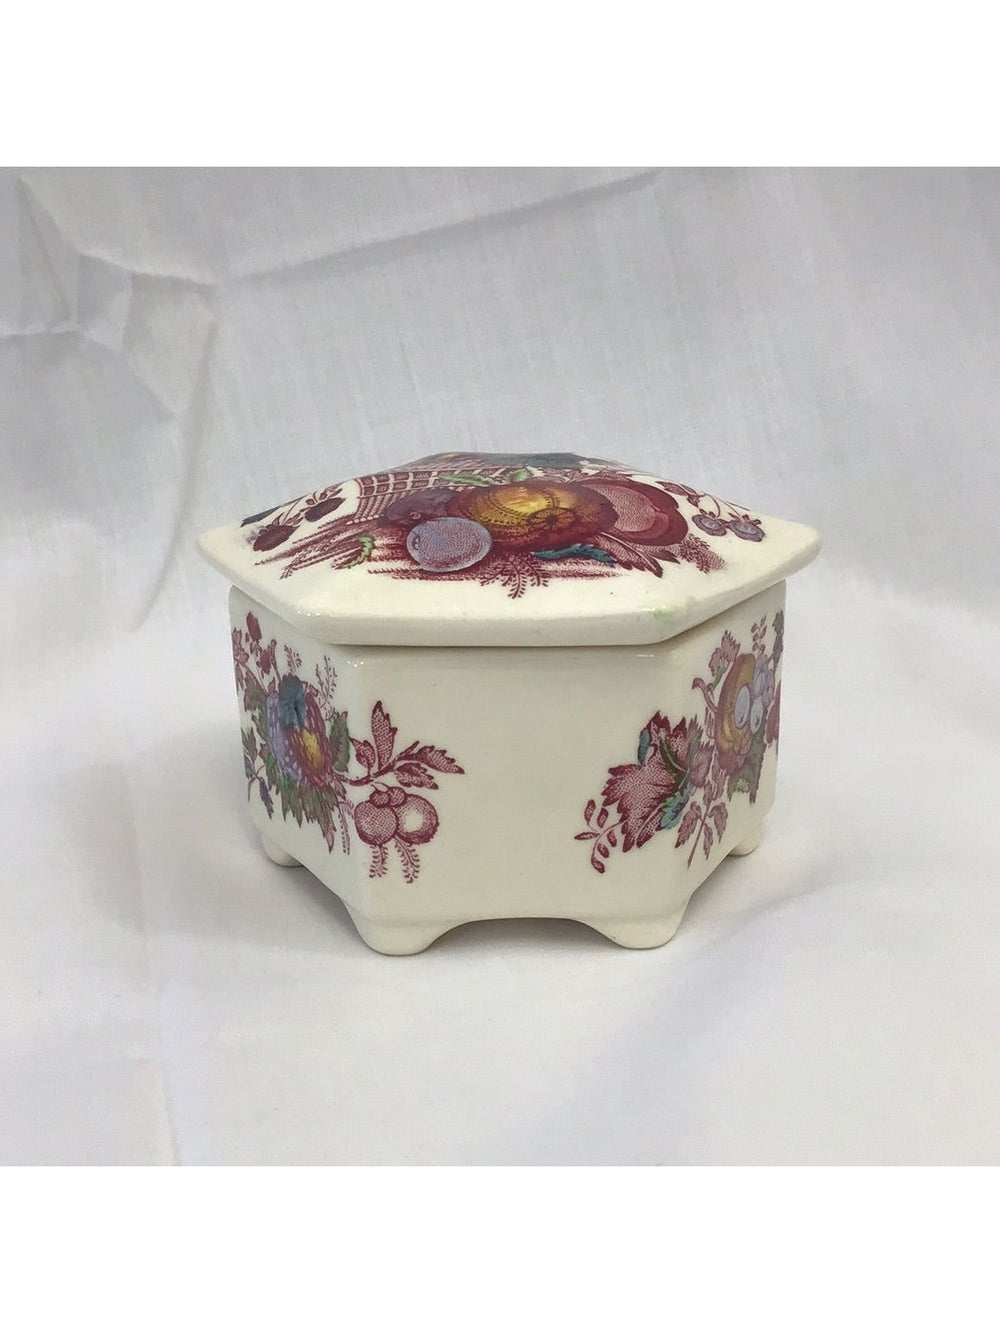 Mason’s Ironstone China Hexagonal Lidded Trinket Dish, Fruit Basket Pattern, Red with Color - The Kennedy Collective Thrift - 